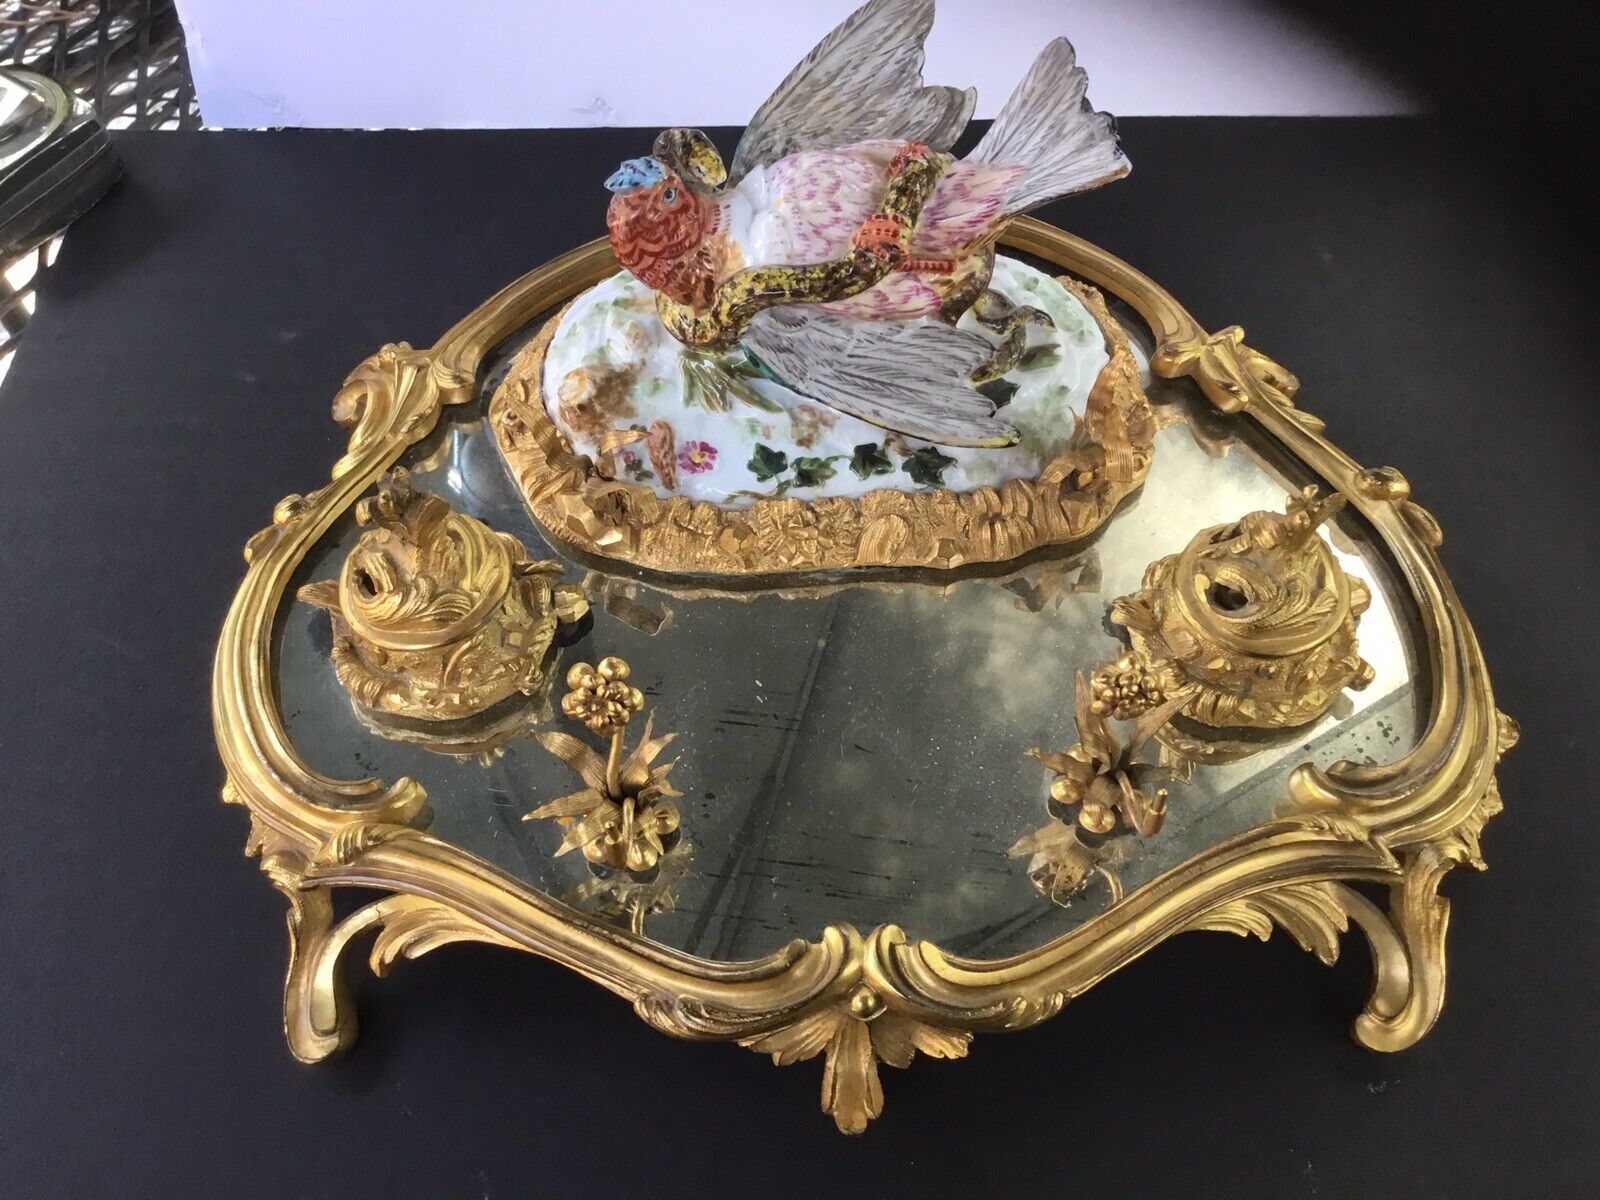 VERY RARE 1850’s FRENCH GILT/MAJOLICA INKWELL DESK SET MUST SEE WOW